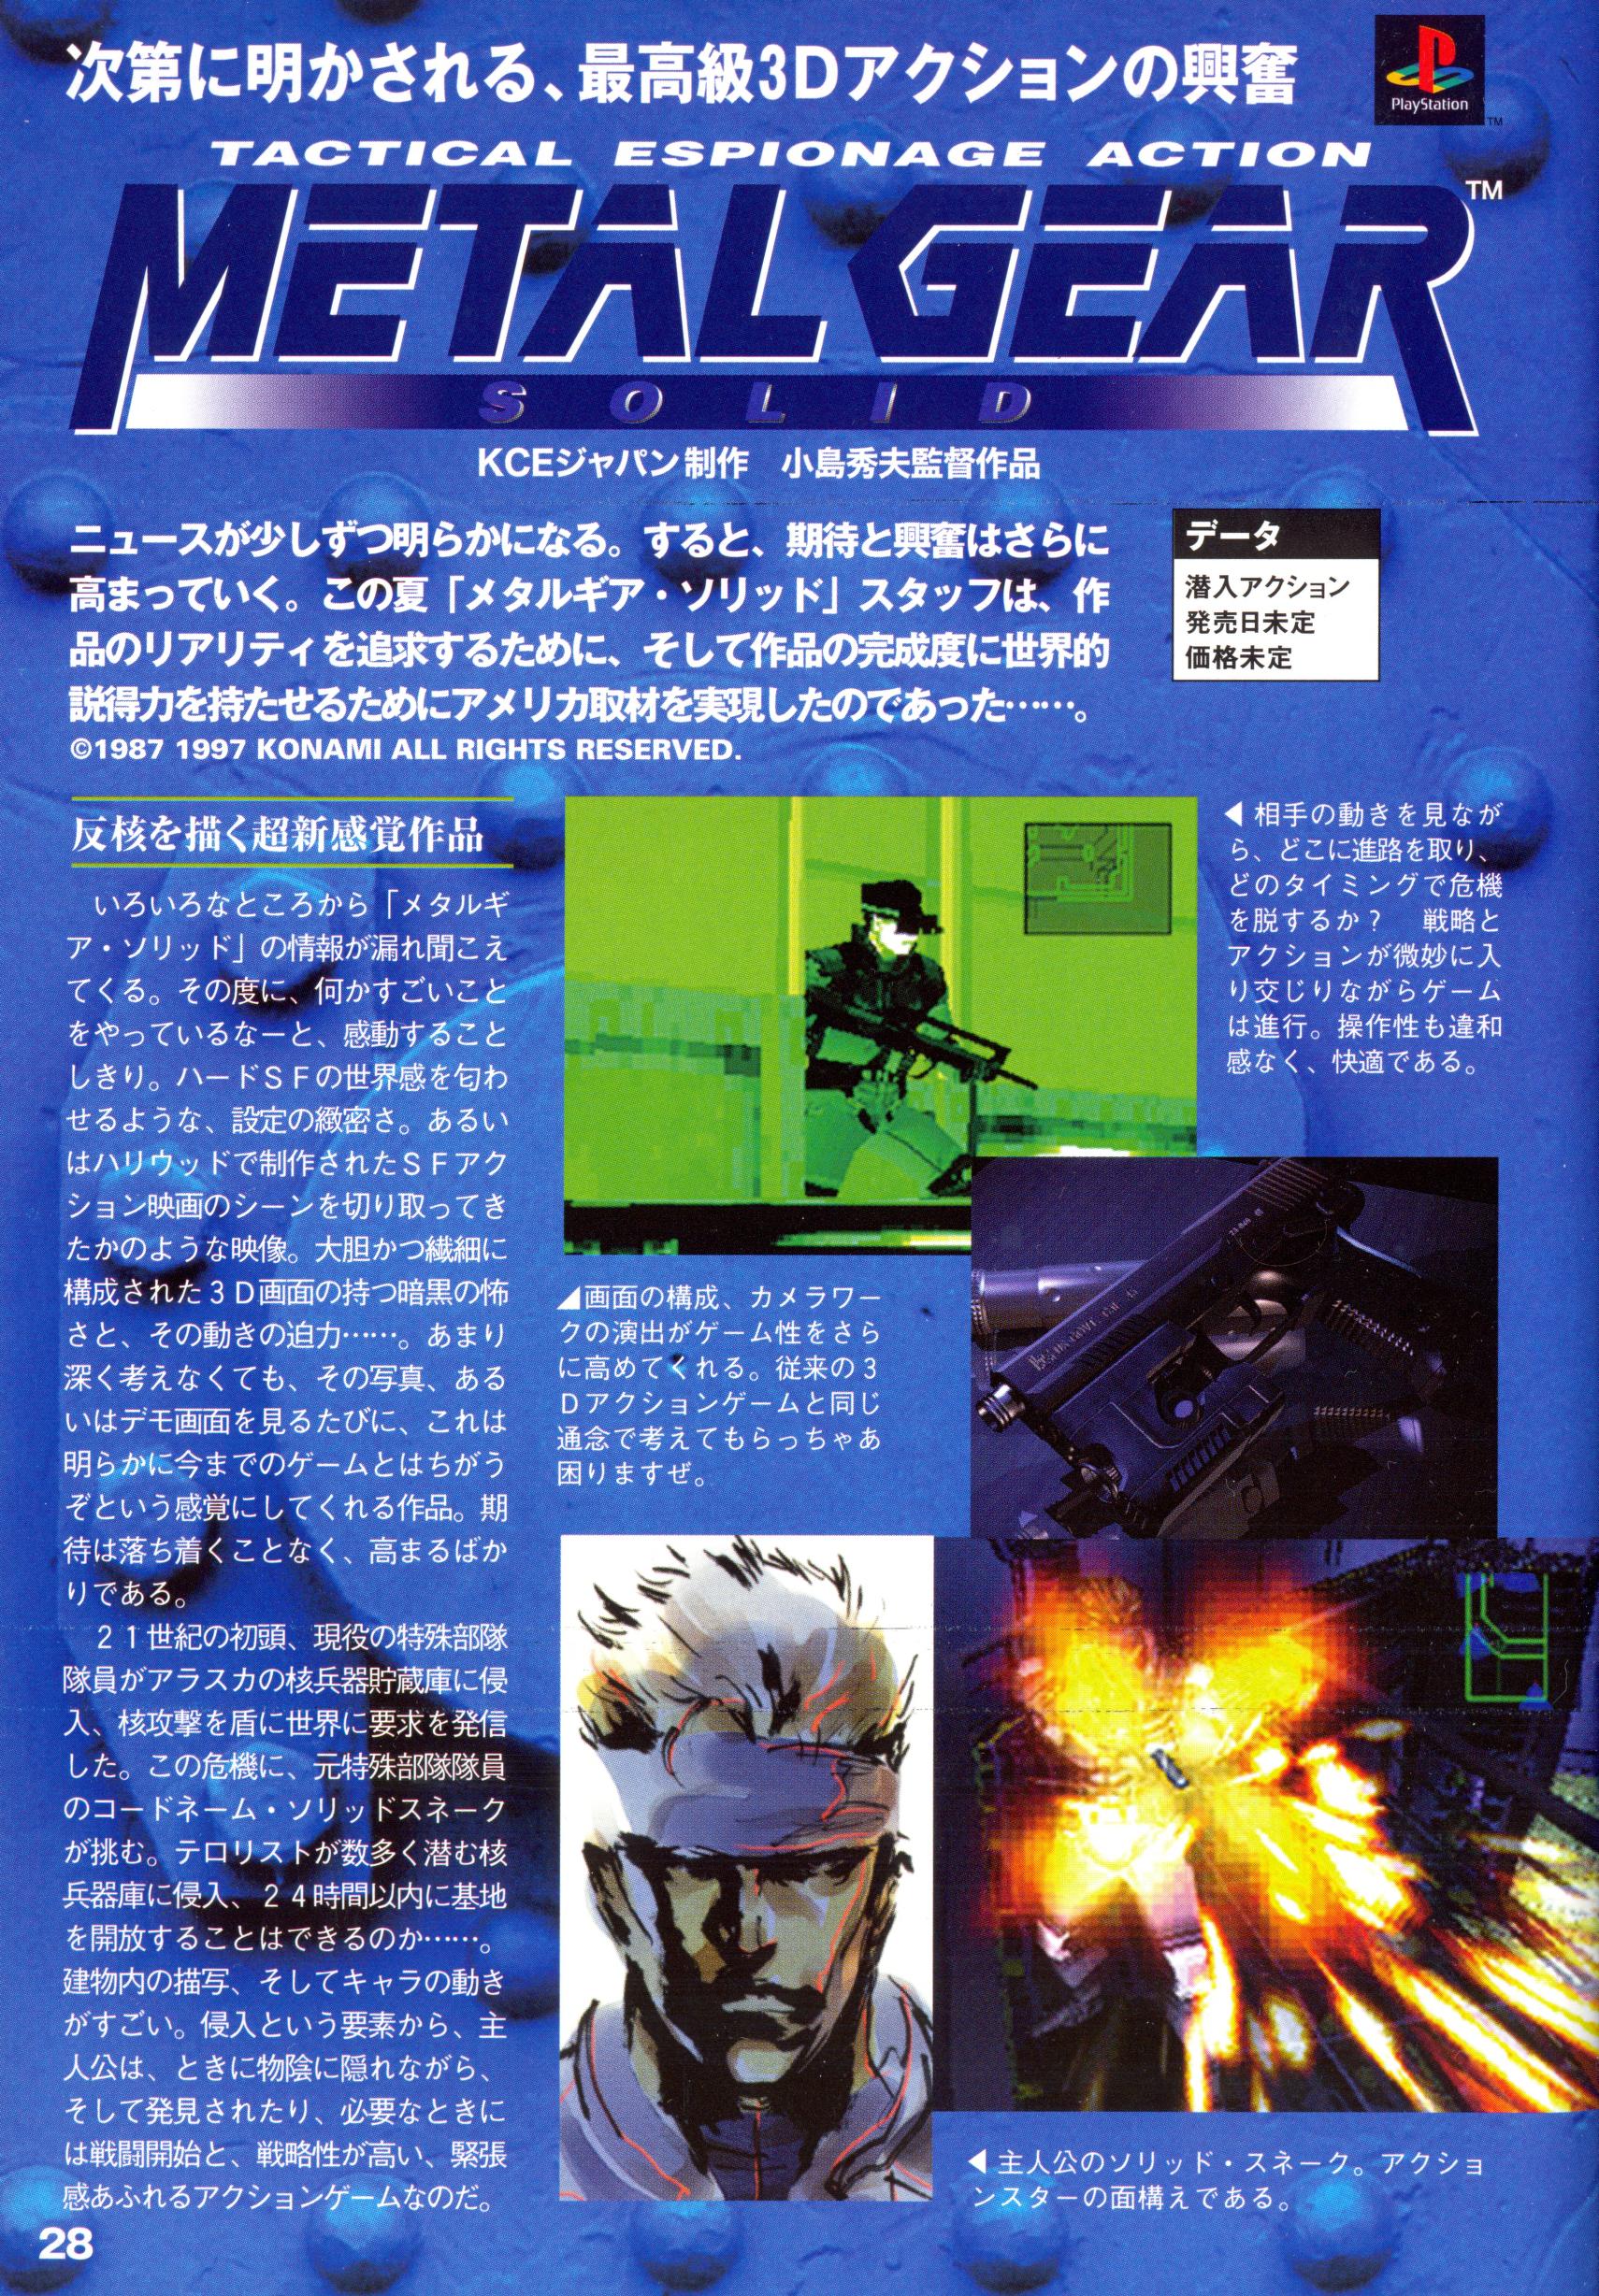 Twitter 上的蛇metal Metal Gear Solid Article From The Autumn 97 Issue Of Konami Look Magazine While Attending That Year Hideo Kojima And His Crew Went To Fort Irwin Along With Motosada